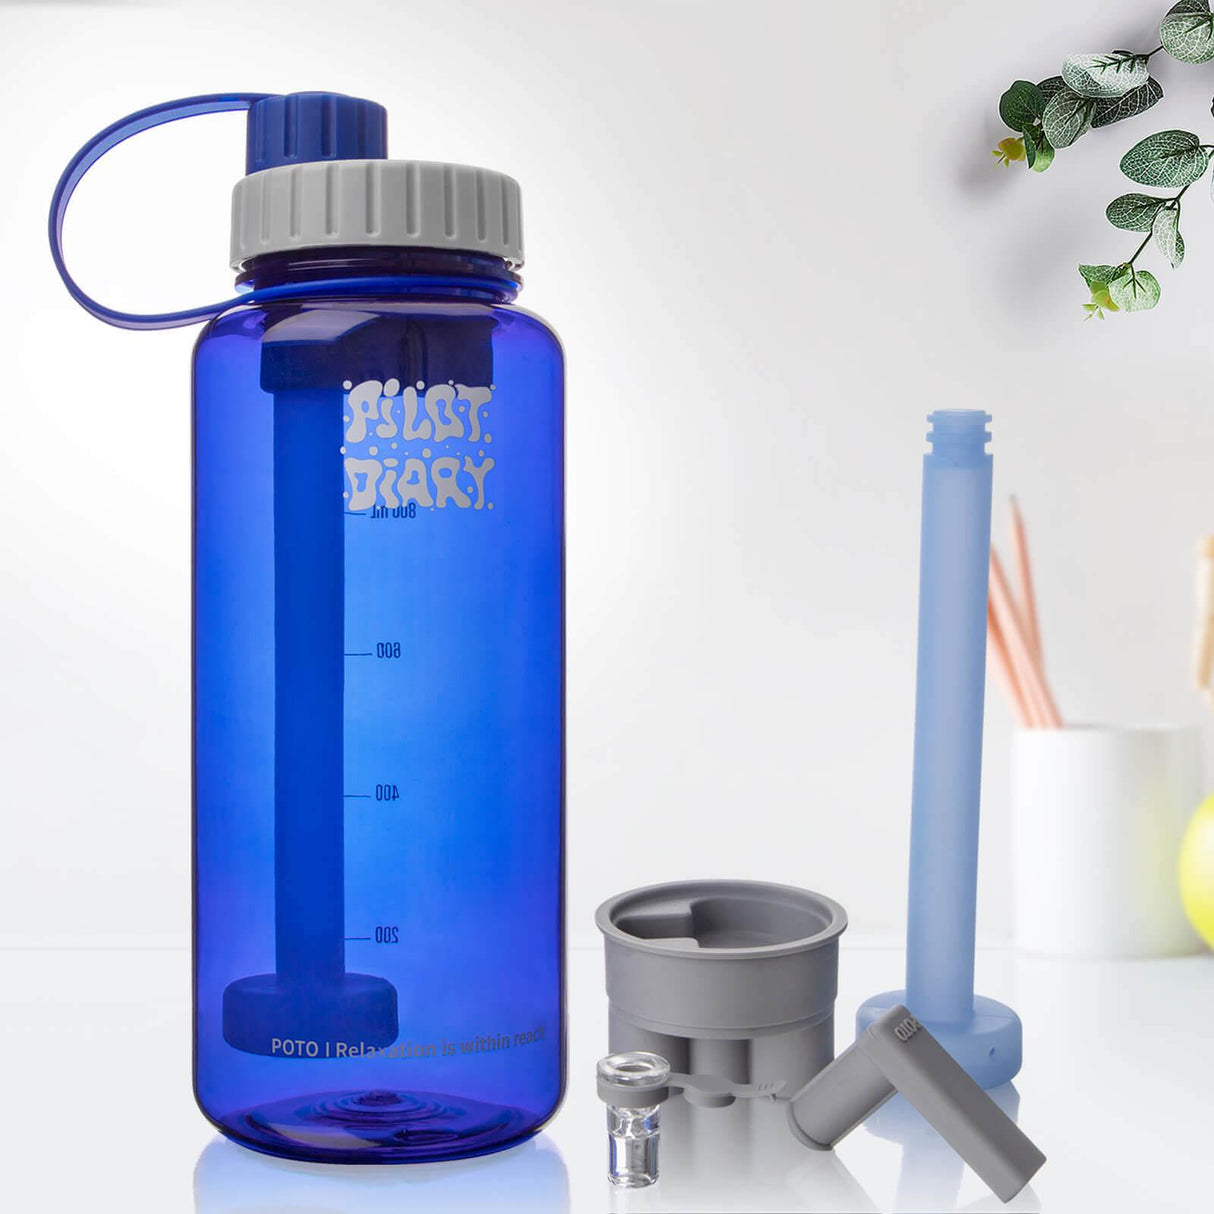 PILOT DIARY POTO Water Bottle Bong in Blue - Front View with Included Accessories